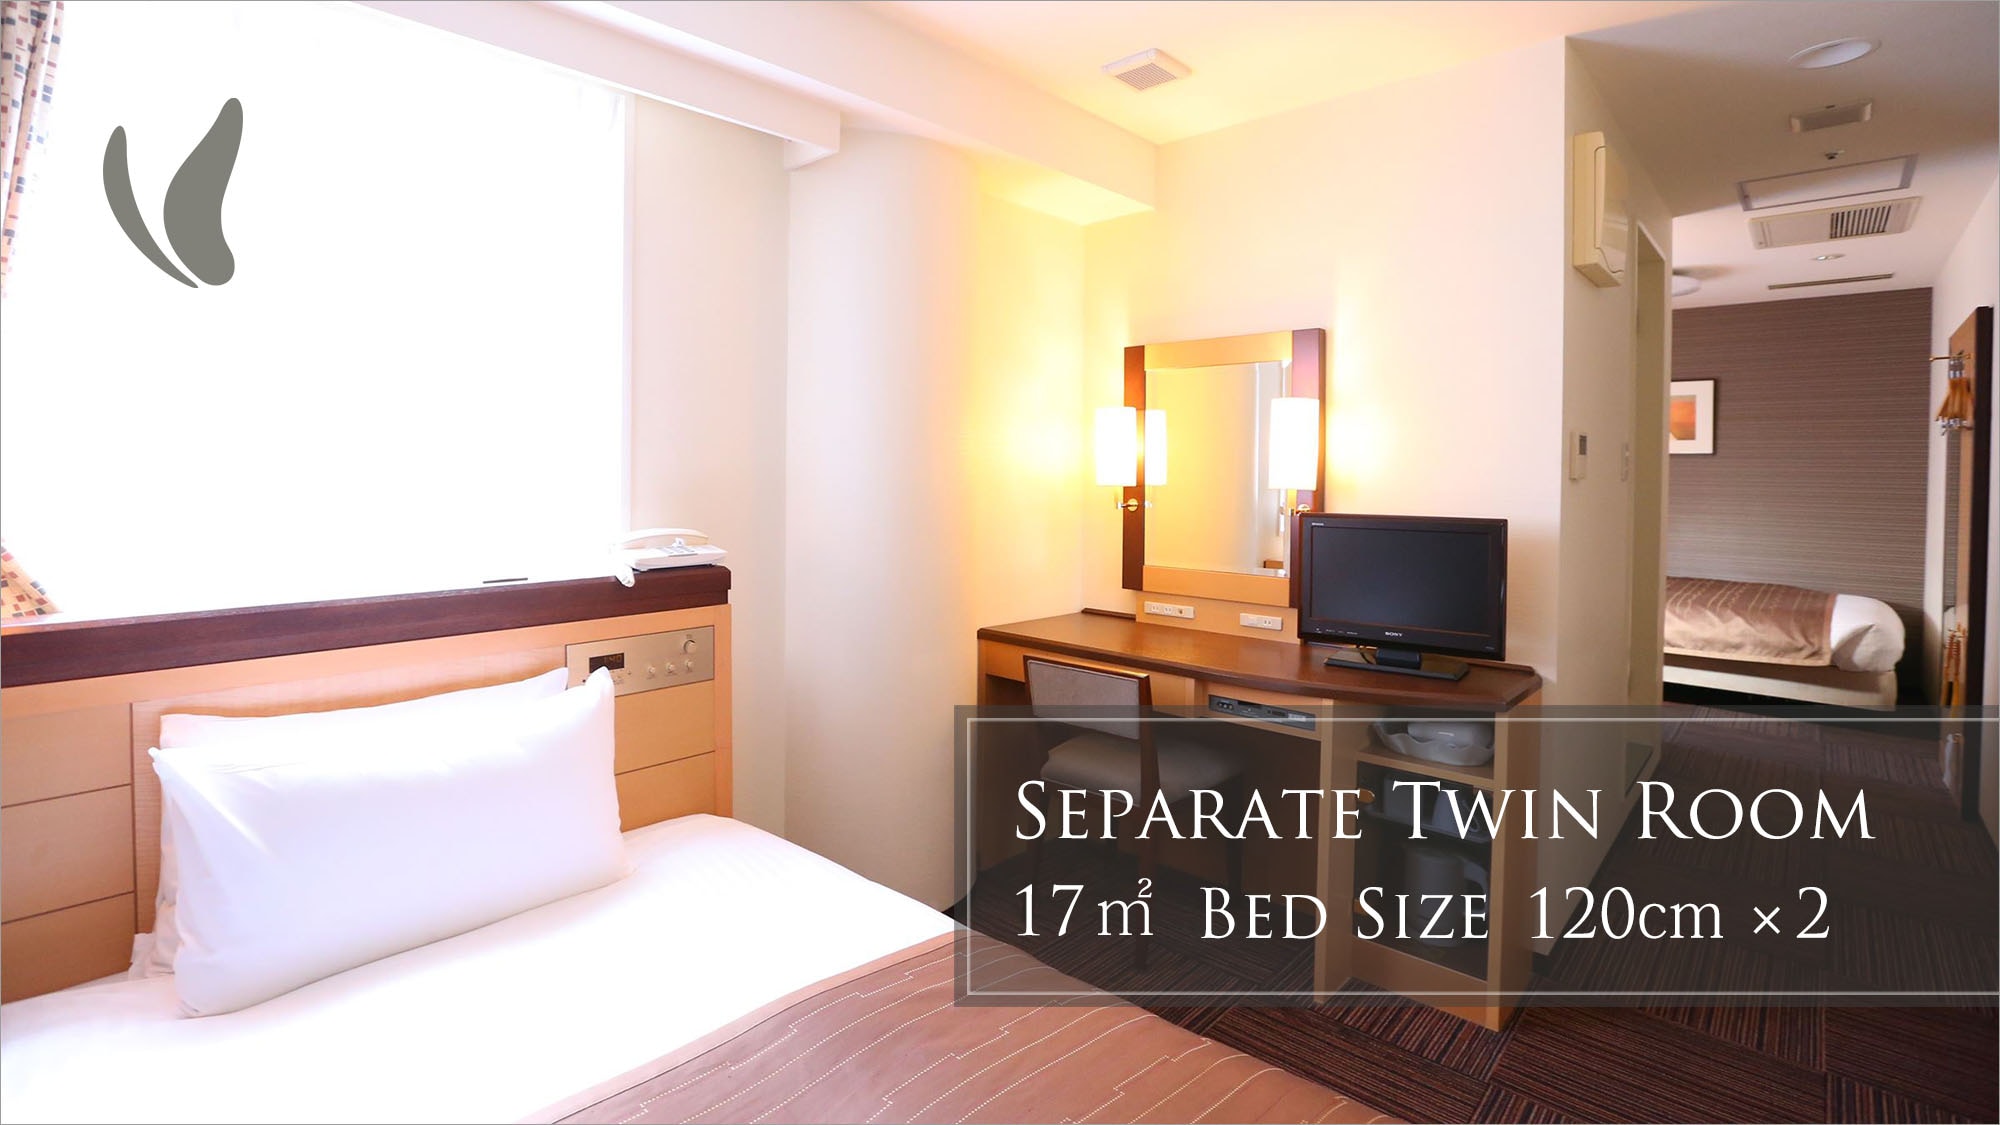 Separate twin room 17 square meters with Simmons bed